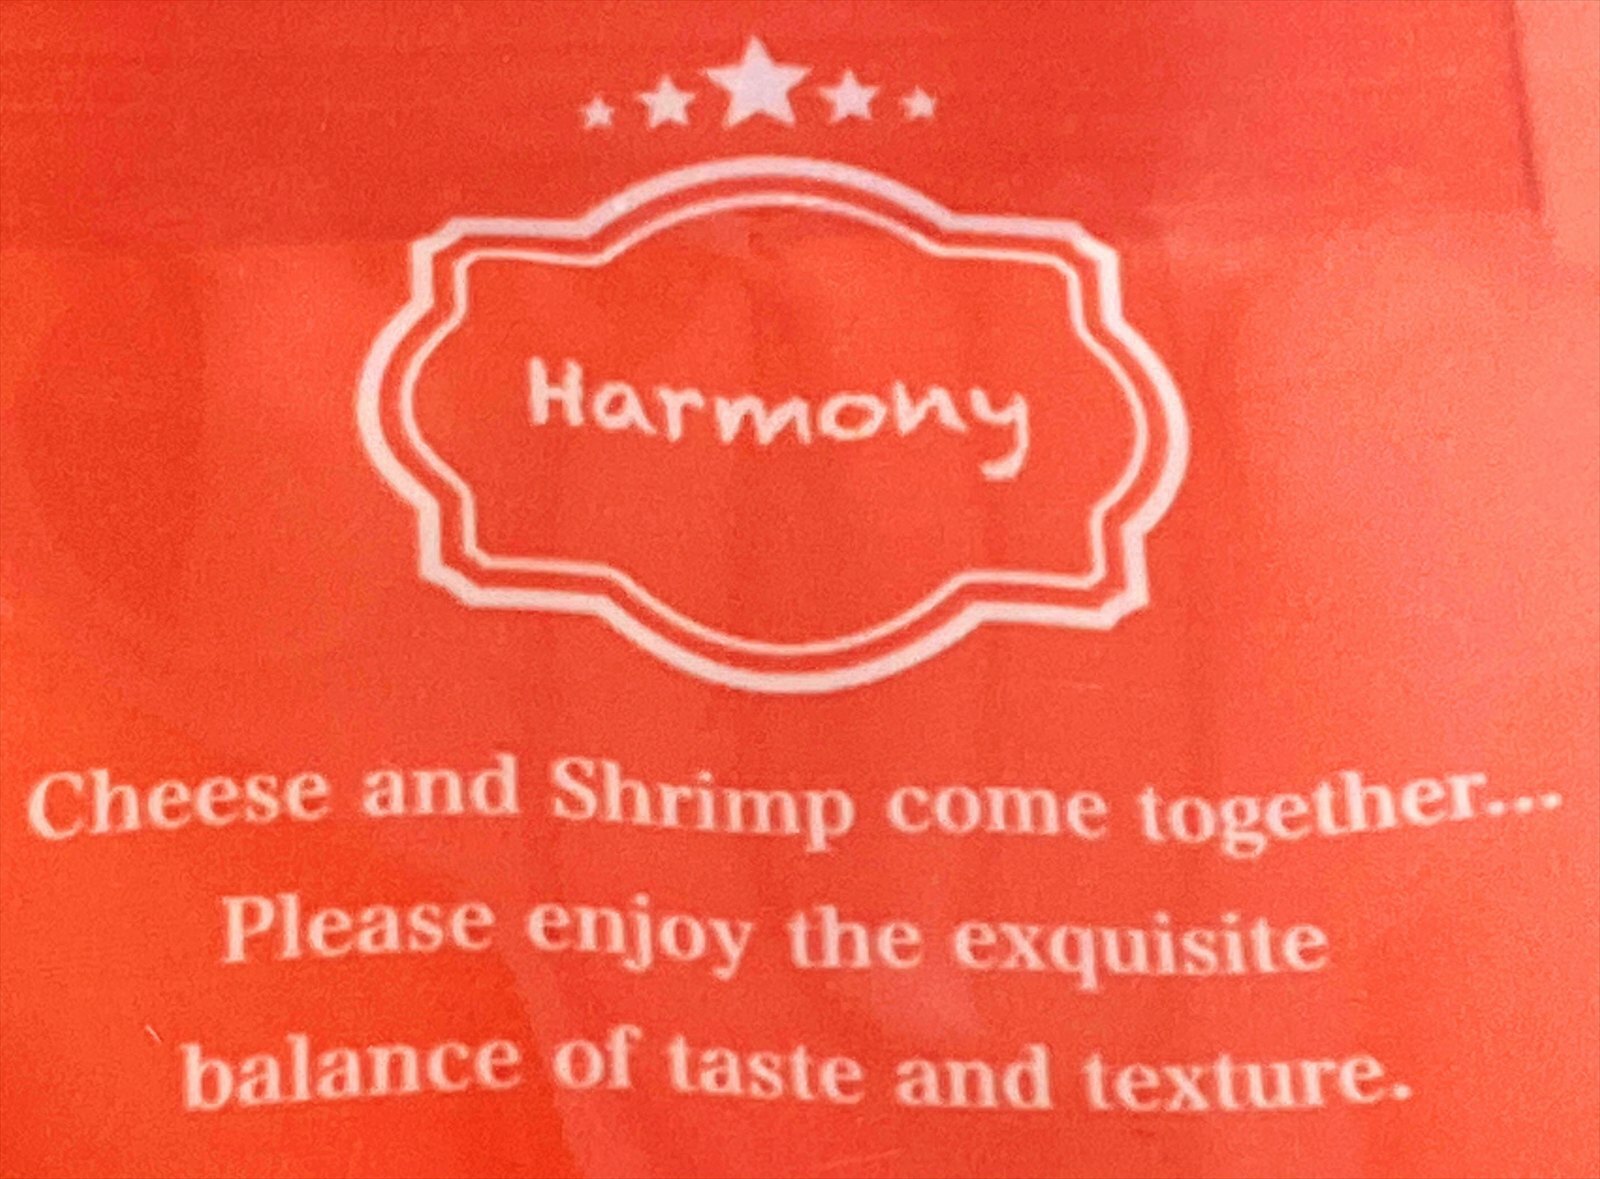 Harmony. Cheese and Shrimp com together... Please enjoy the exquisite balance of taste and texture.